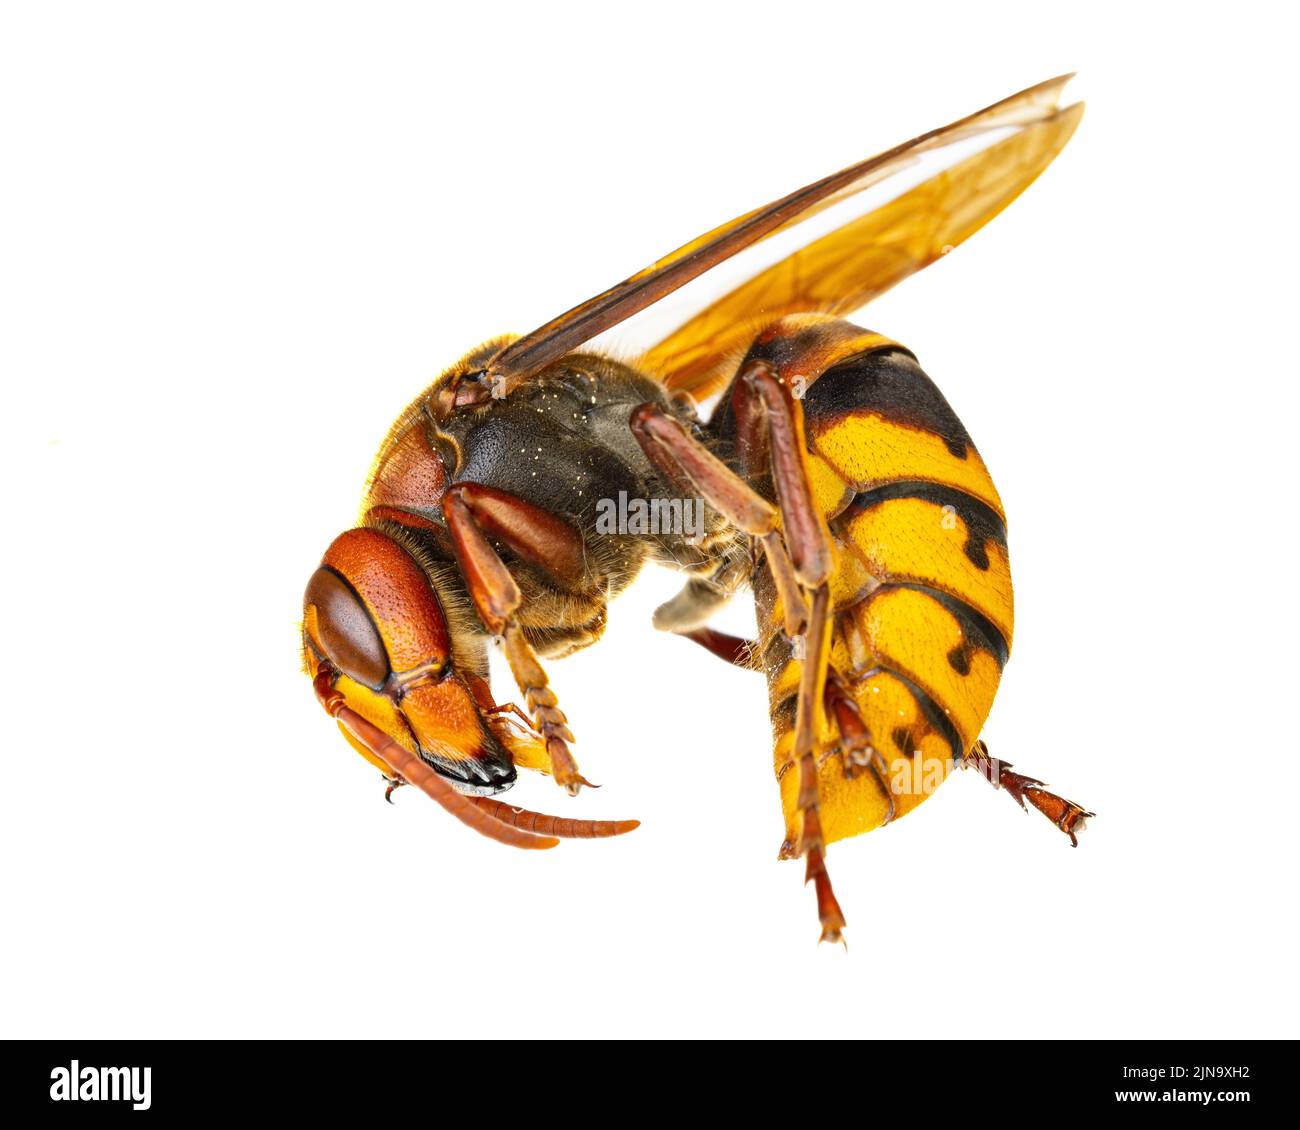 insects of europe - wasps: macro of  european hornet  ( Vespa crabro - Europäische Hornisse )  isolated on white background Stock Photo